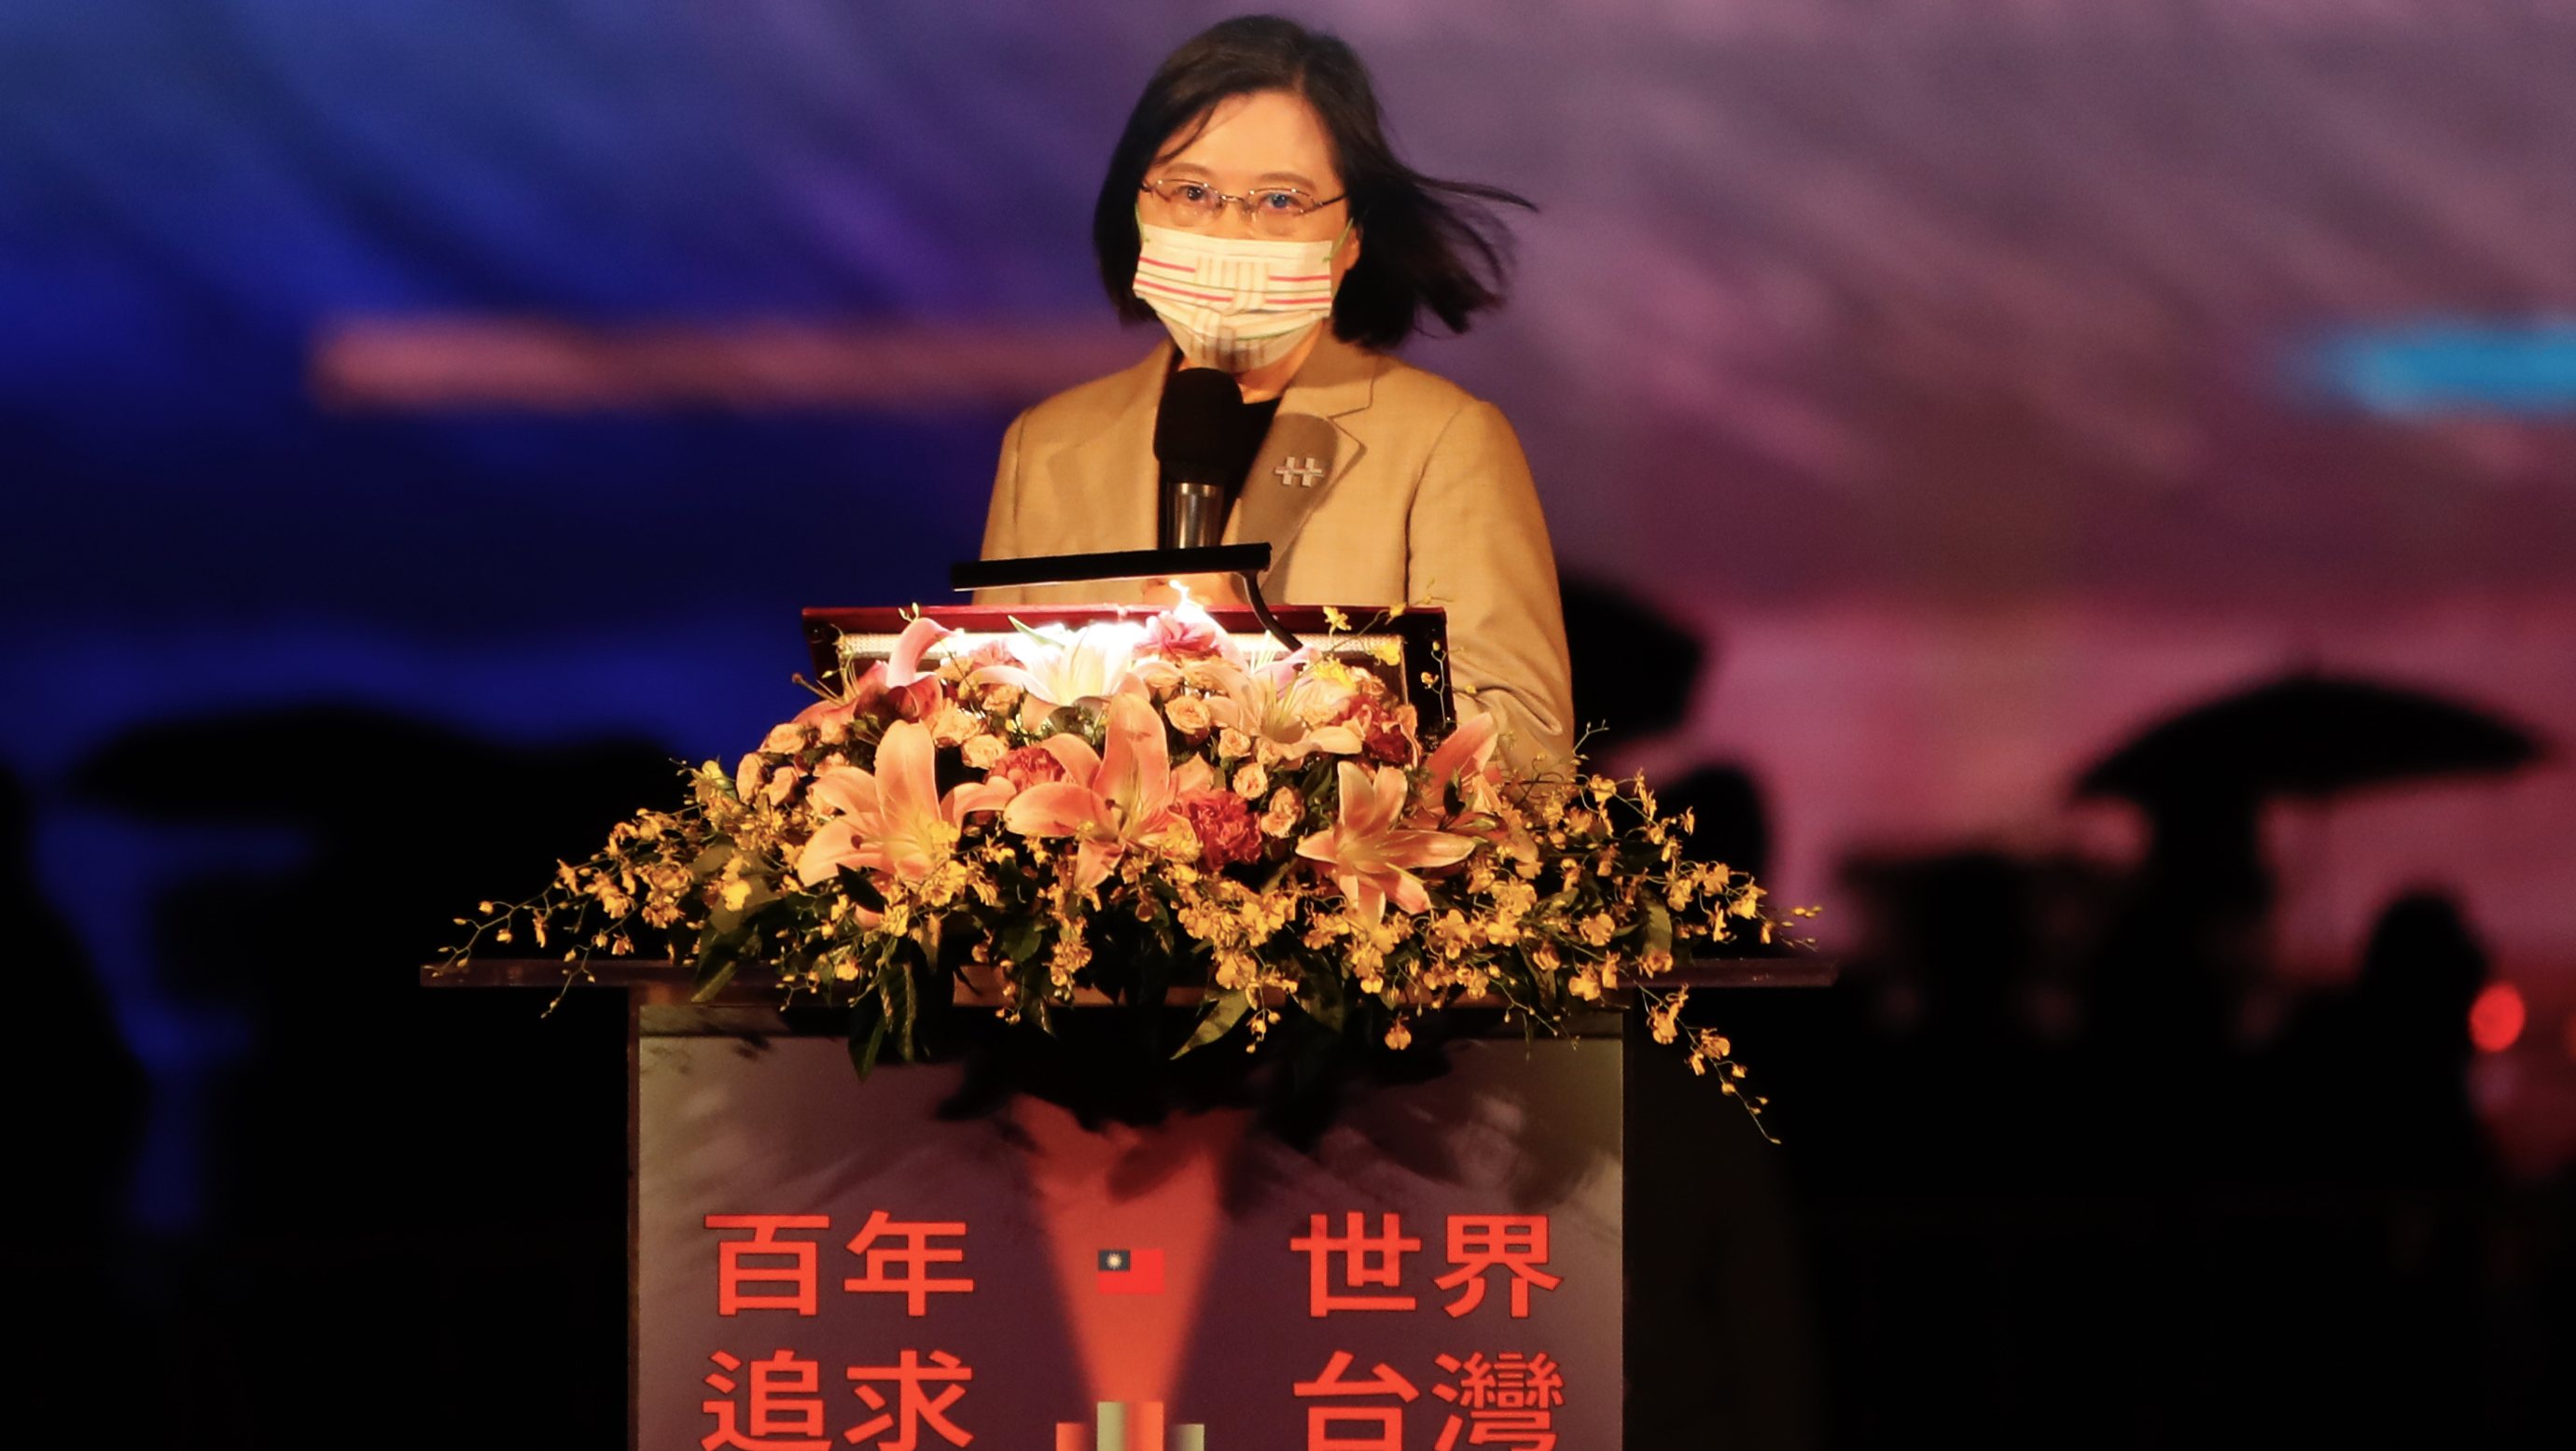 Taiwan President Tsai Ing-wen Speaks During Projection Mapping Opening Ceremony